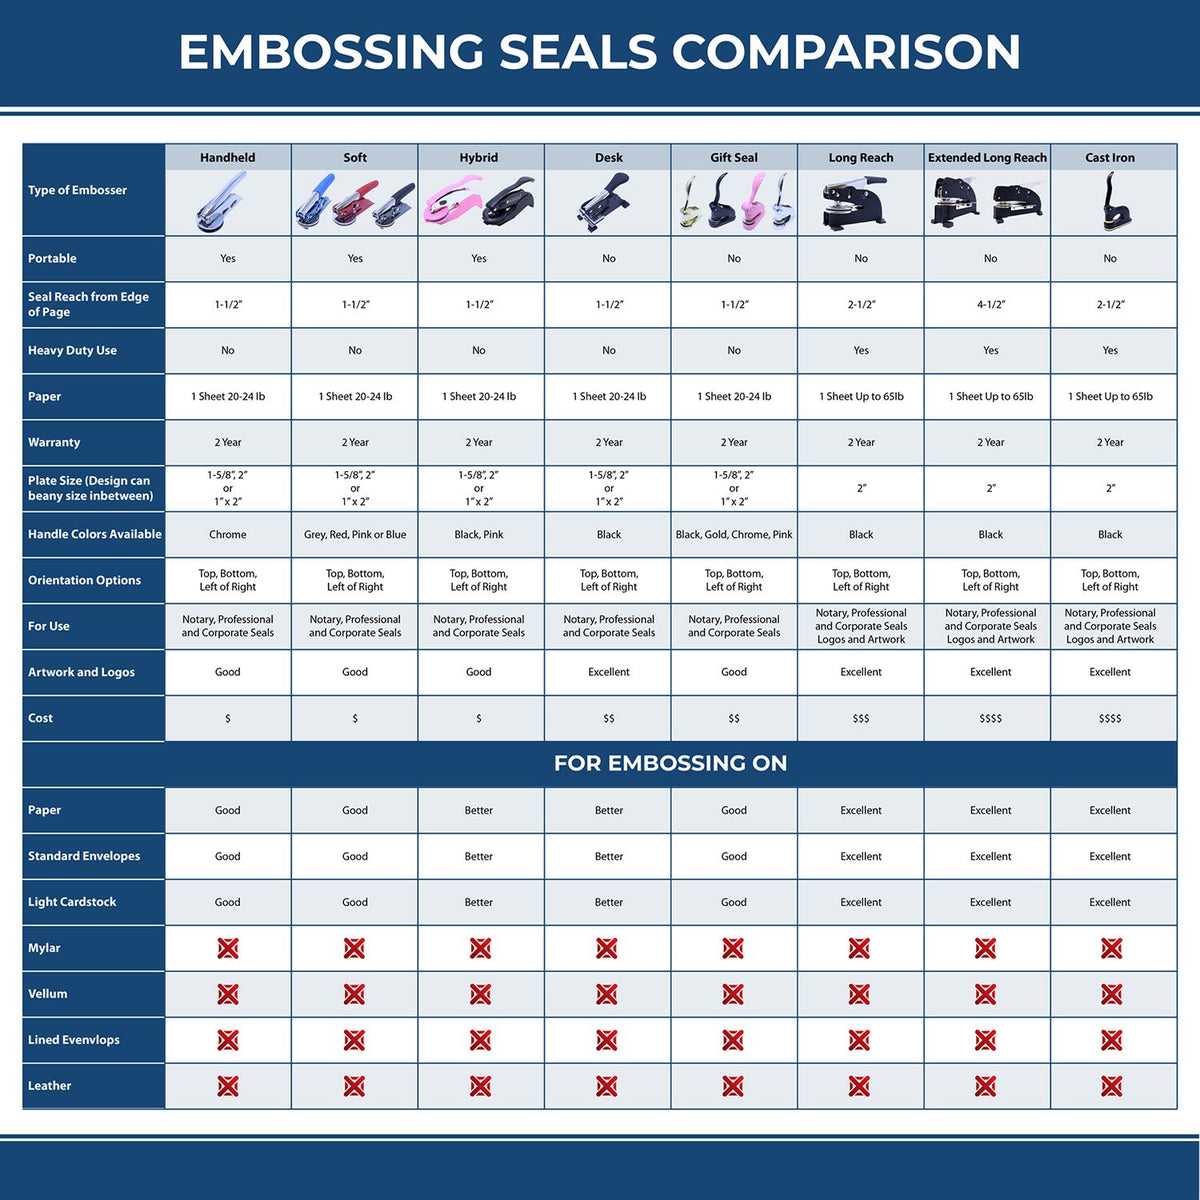 A comparison chart for the different types of mount models available for the Gift Connecticut Engineer Seal